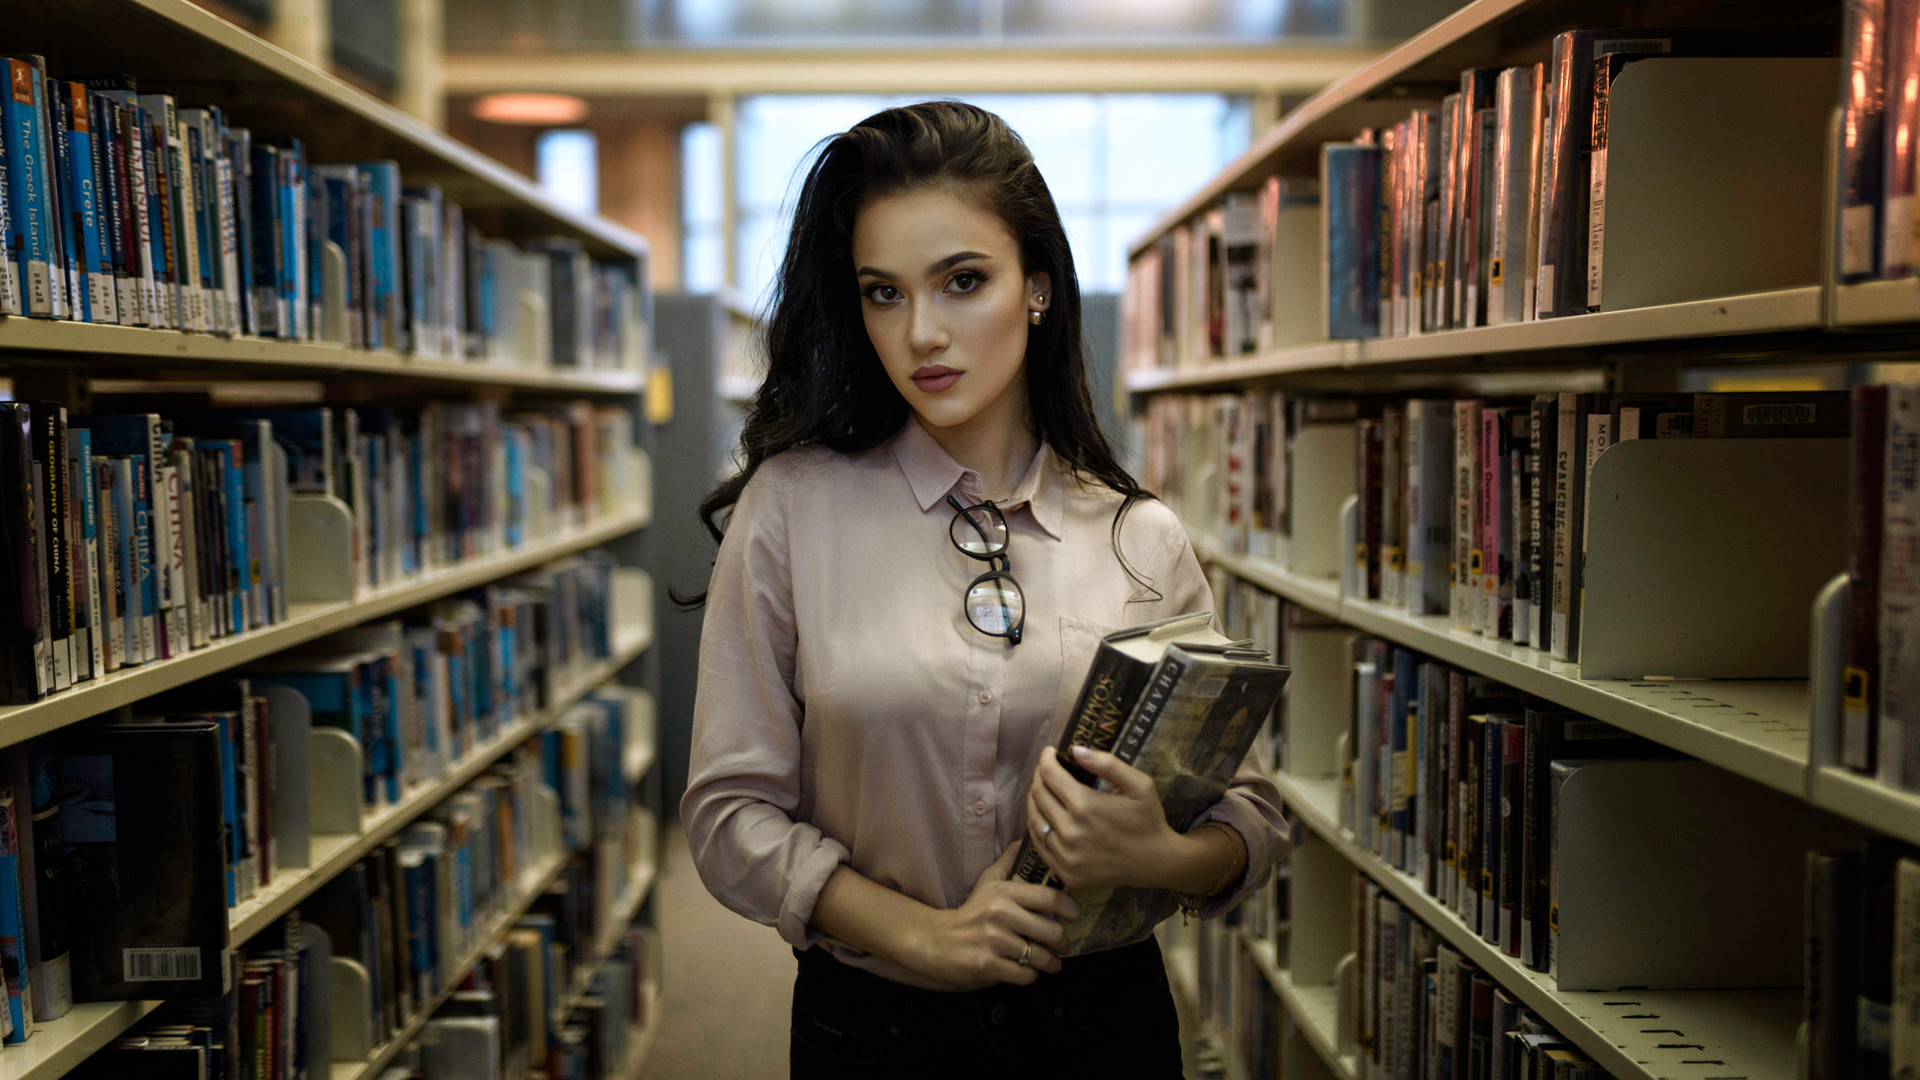 1920x1080 women-with-books-in-library-dp.jpg